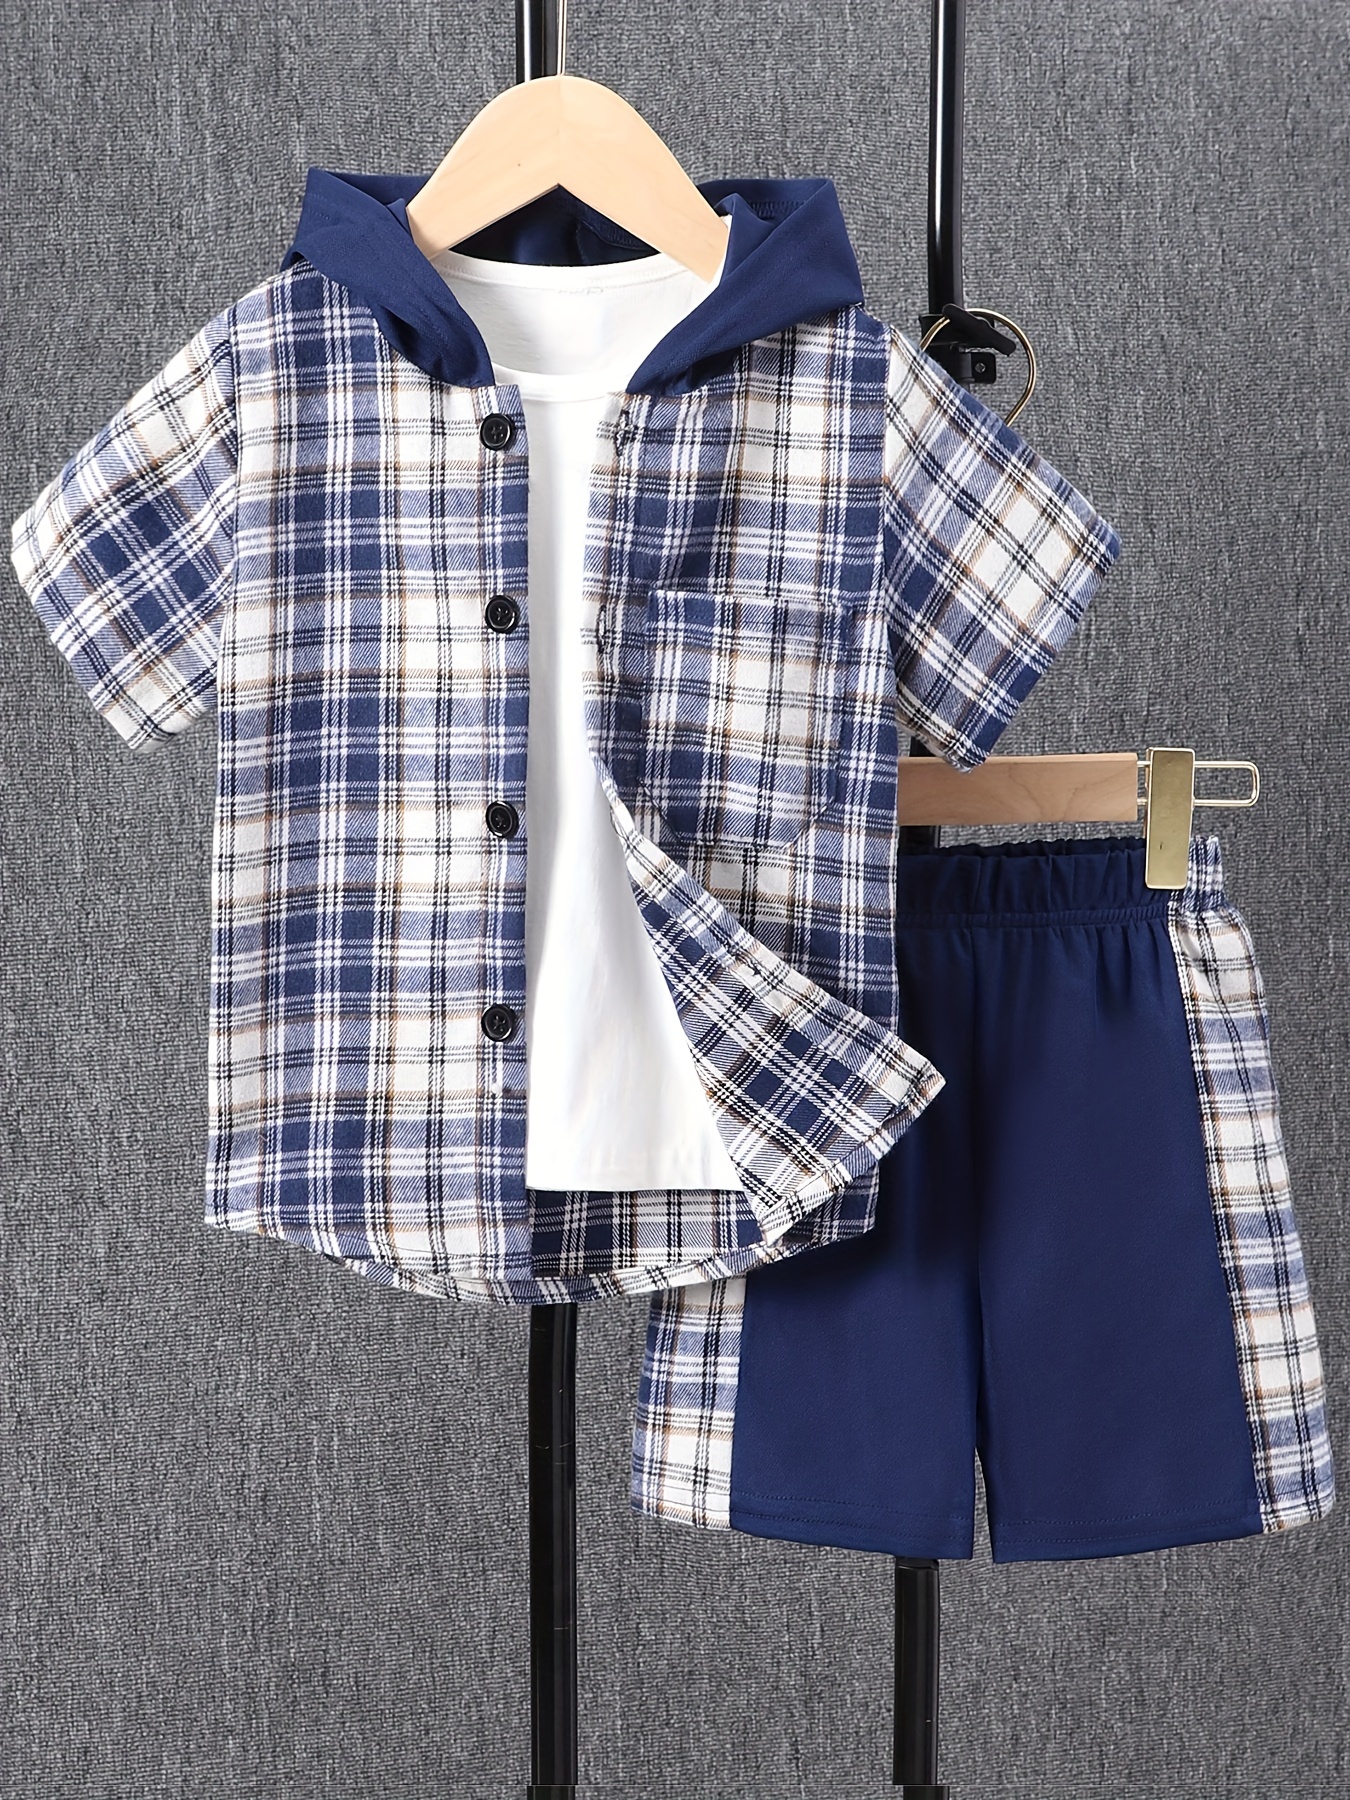 Boys Plaid Outfit Short Sleeves Button Down Hooded Shirt & Shorts